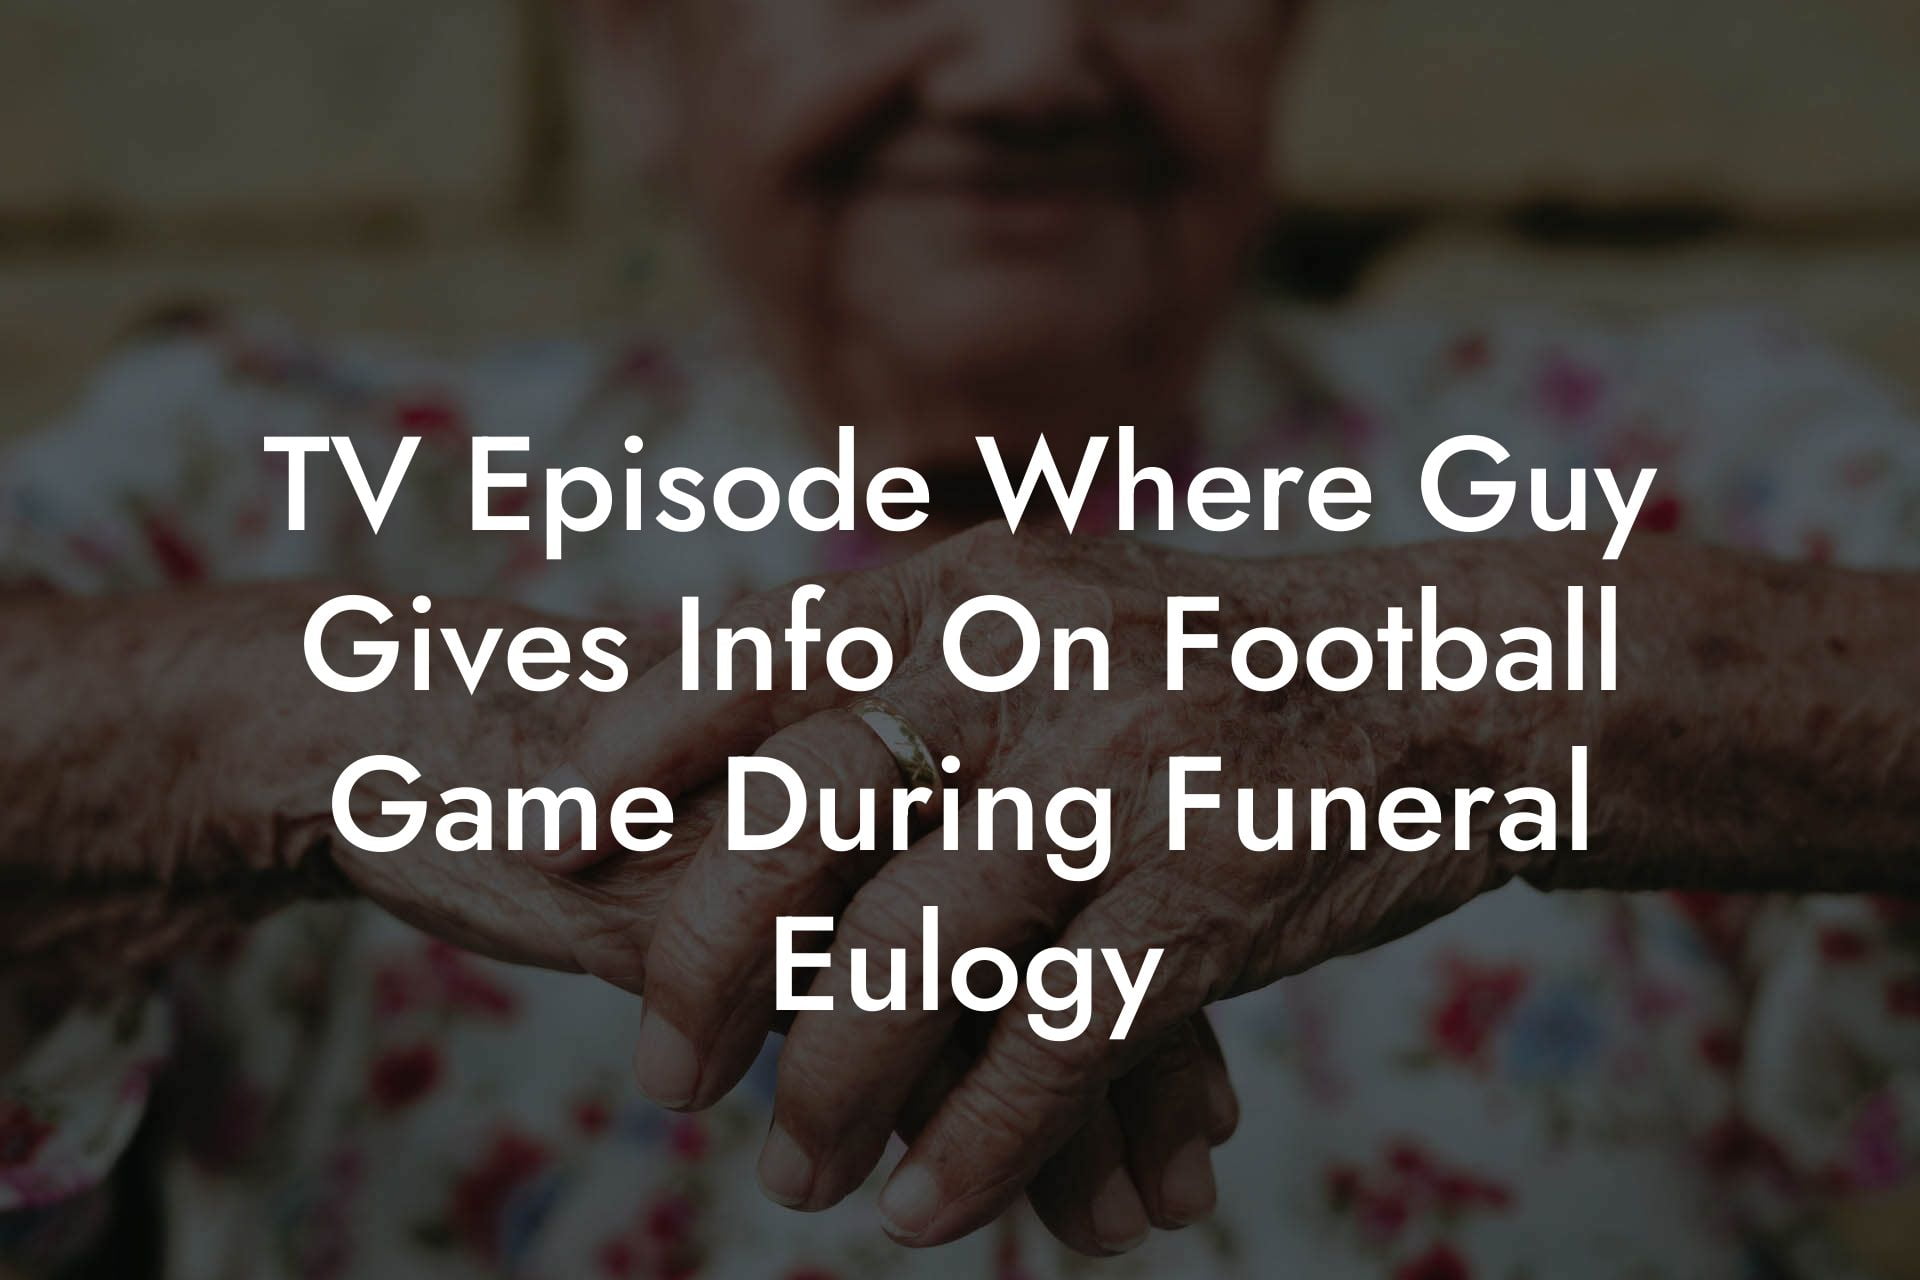 TV Episode Where Guy Gives Info On Football Game During Funeral Eulogy